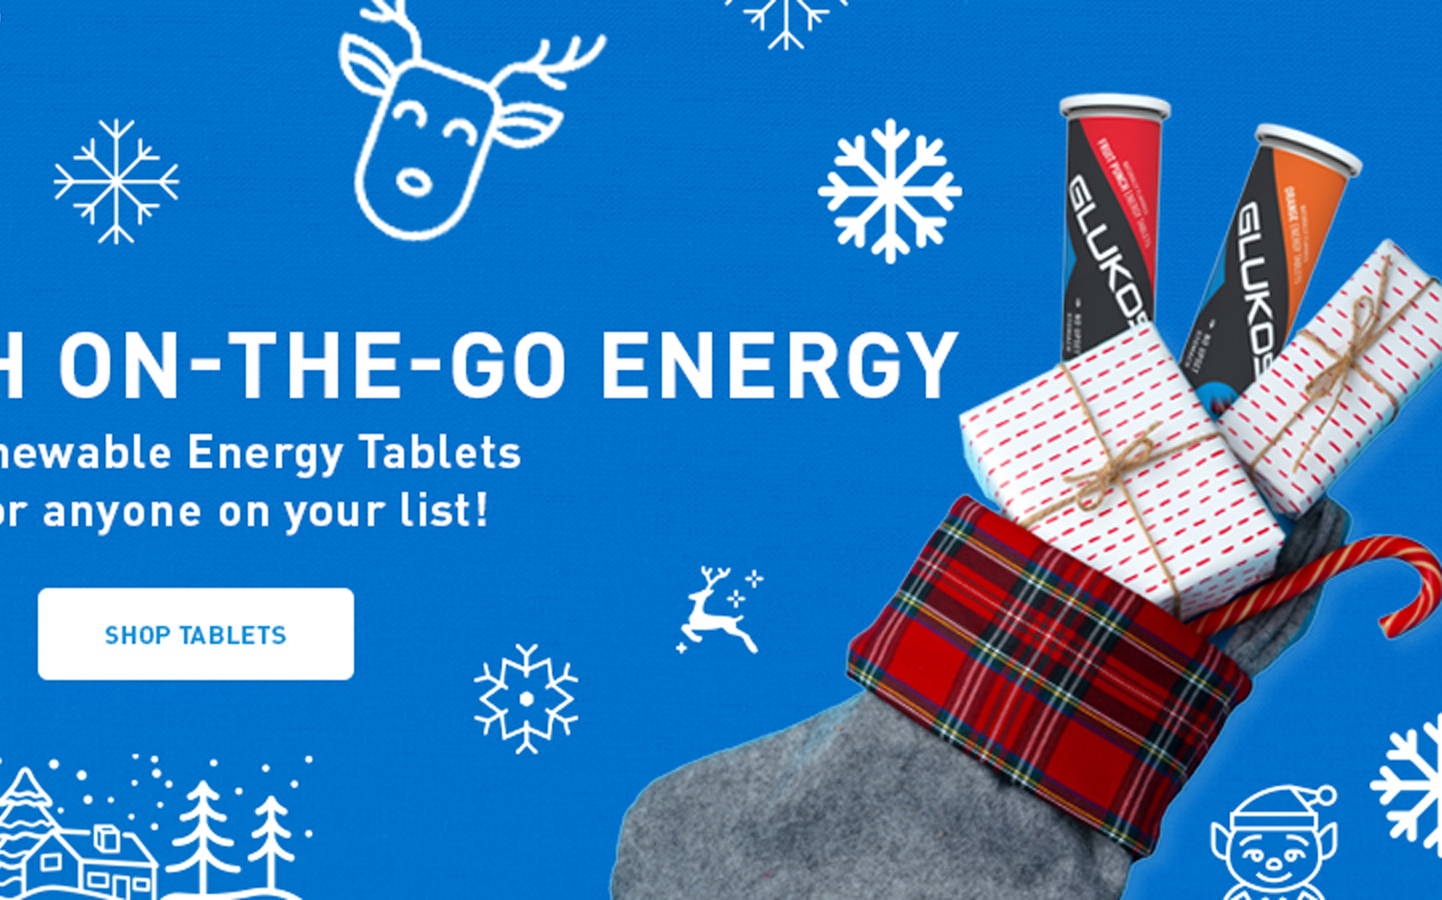 Fill Stockings with on-the-go energy. Energy Liquid Gels & Chewable Energy Tablets are the perfect gift for anyone on your list! Shop Tablets